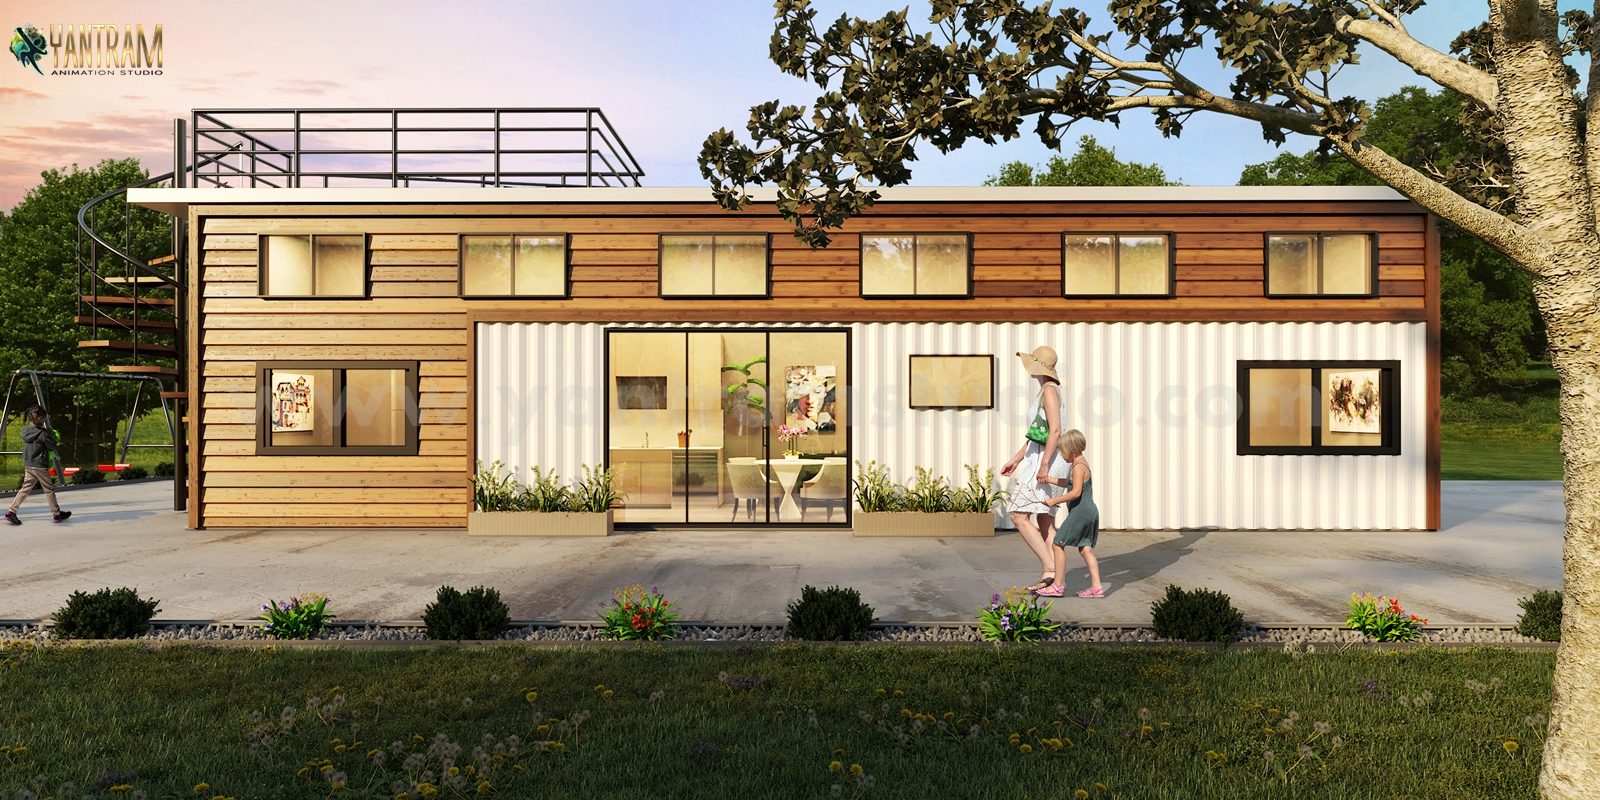 Architectural visualisation services to Popular Shipping Container House by Yantram Architectural Design Studio, Amsterdam – Netherland